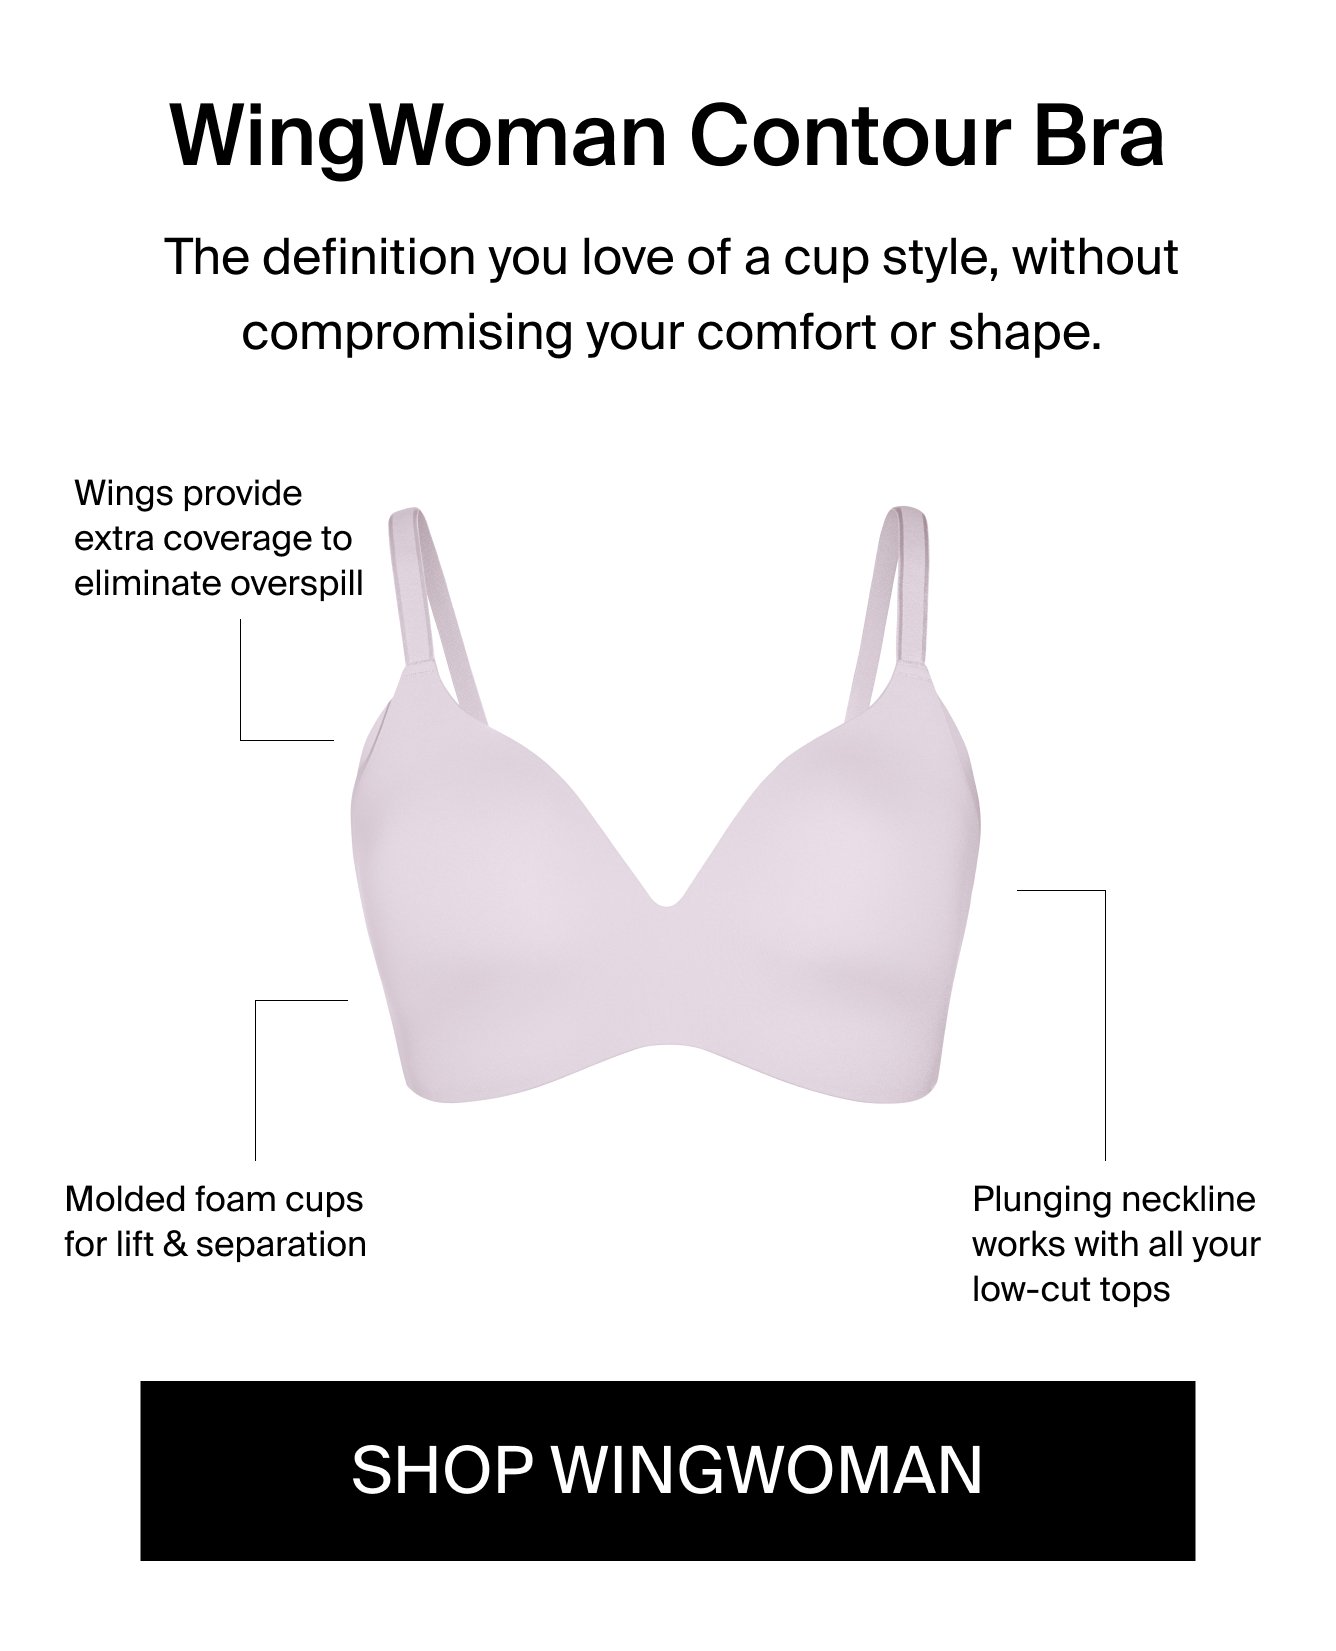 Knix CA: The only bra cheat sheet you need